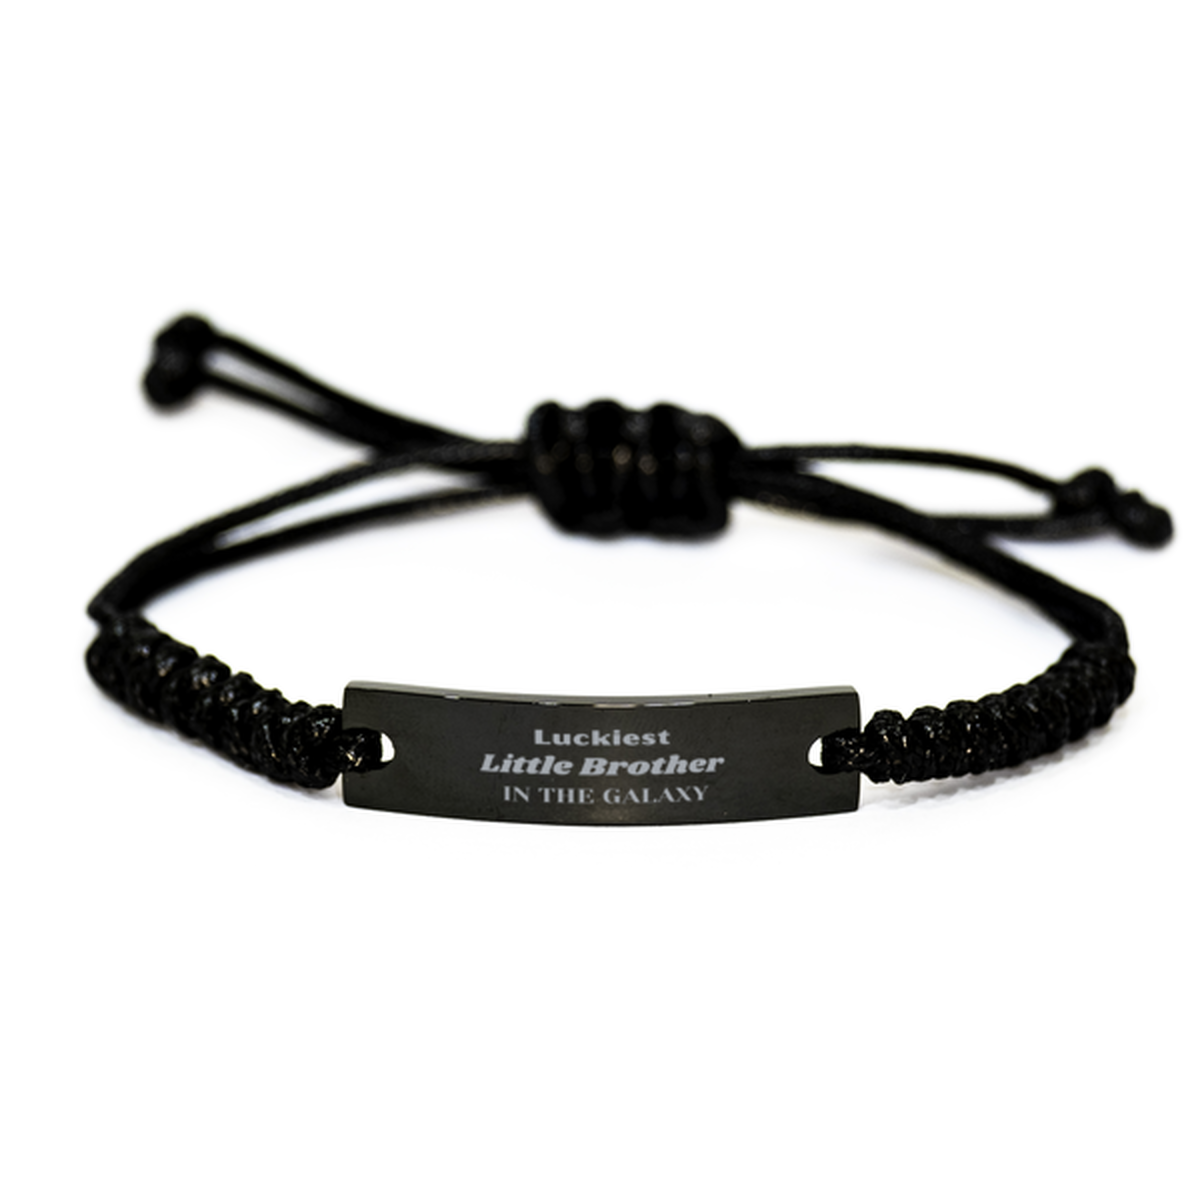 Luckiest Little Brother in the Galaxy, To My Little Brother Engraved Gifts, Christmas Little Brother Black Rope Bracelet Gifts, X-mas Birthday Unique Gifts For Little Brother Men Women